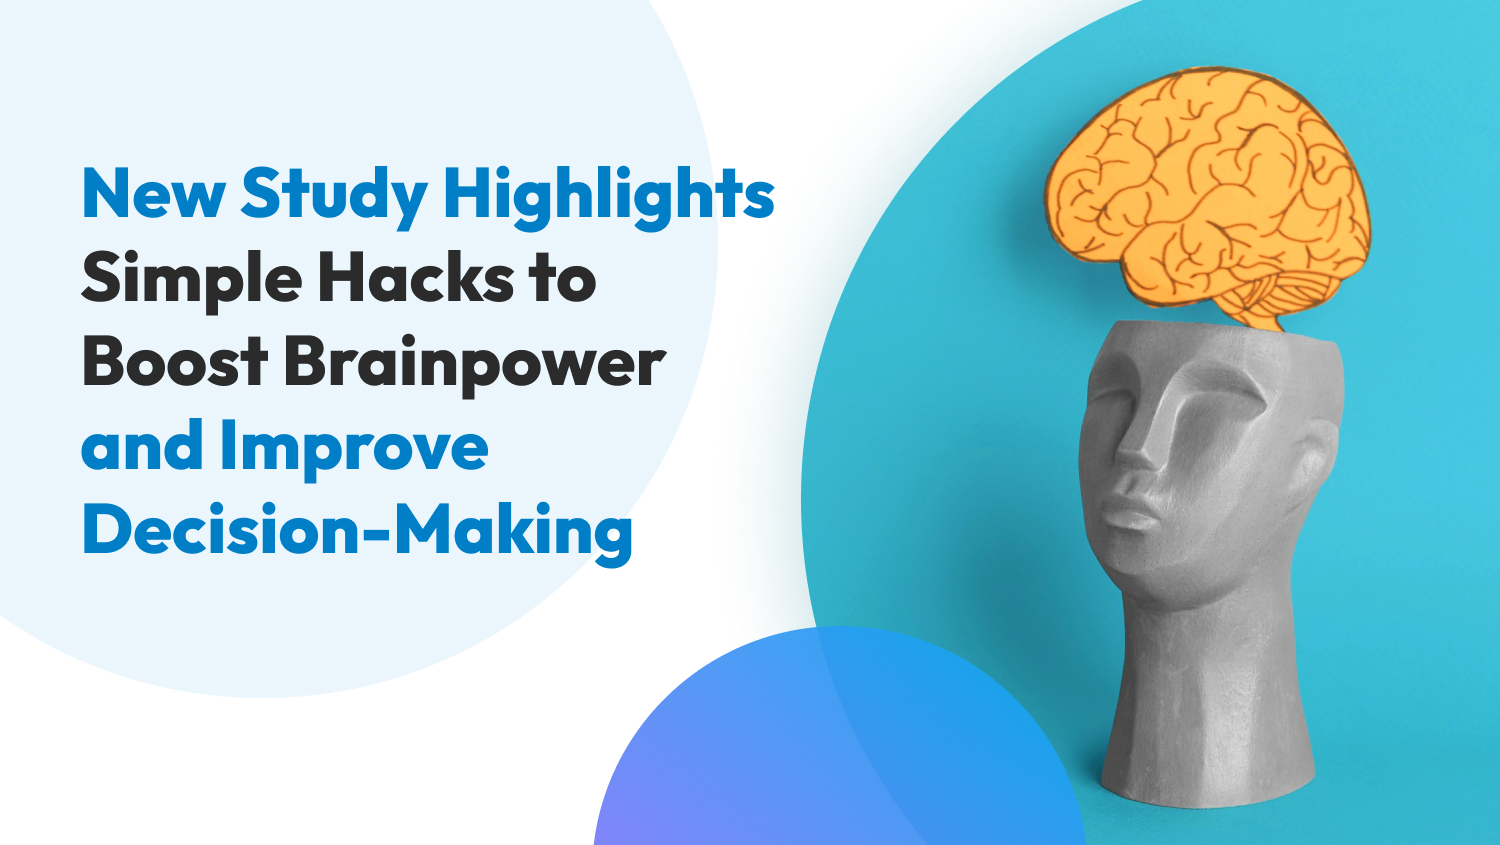 New Study Highlights Simple Hacks to Boost Brainpower and Improve Decision-Making